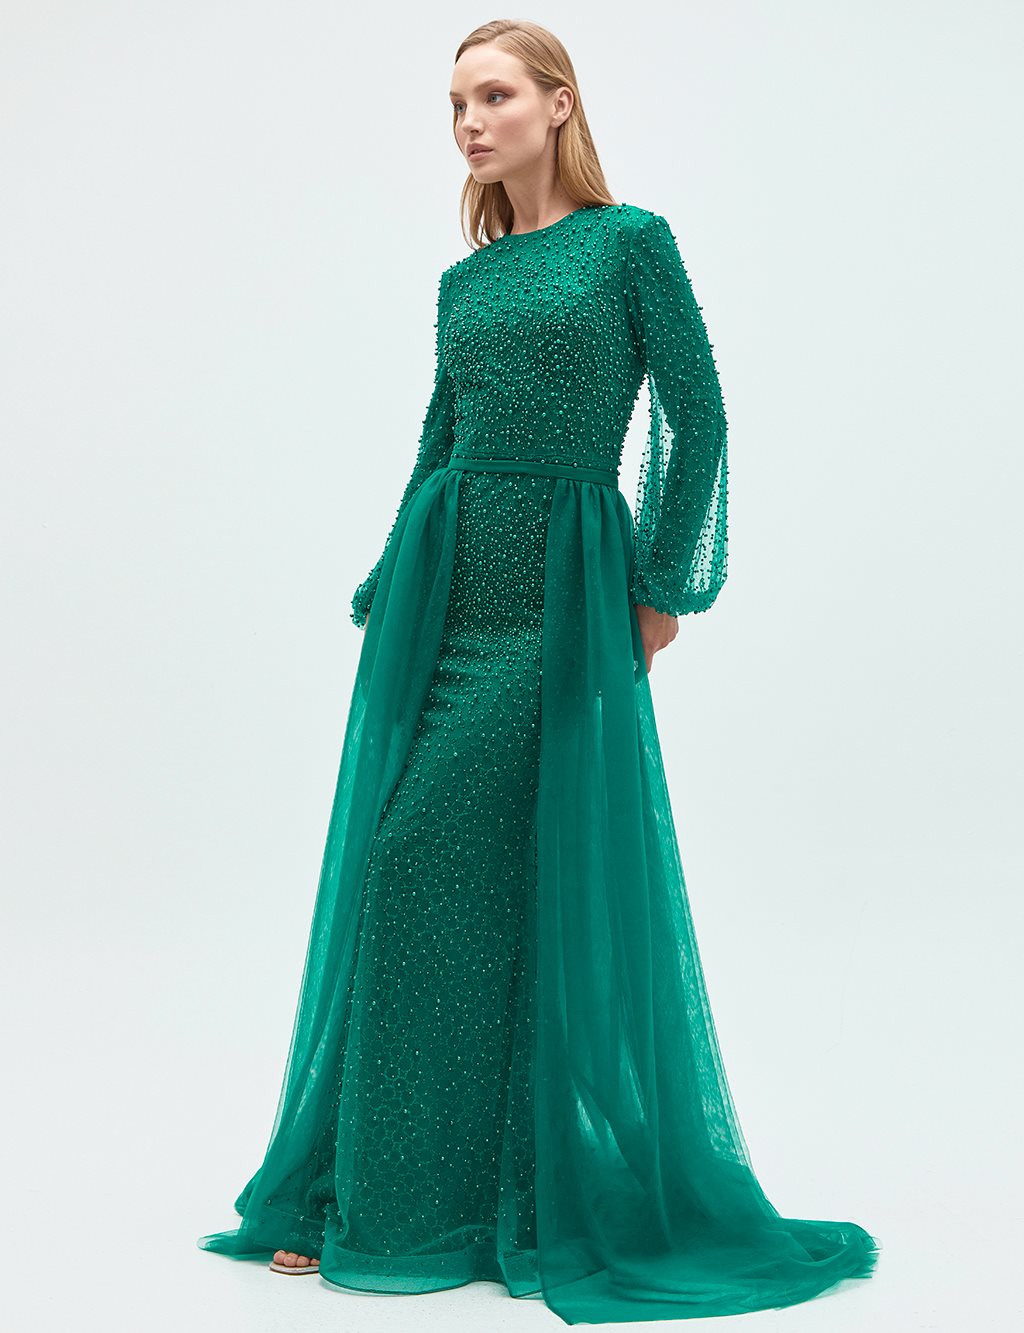 Pearl Embroidered Cape Evening Dress Emerald